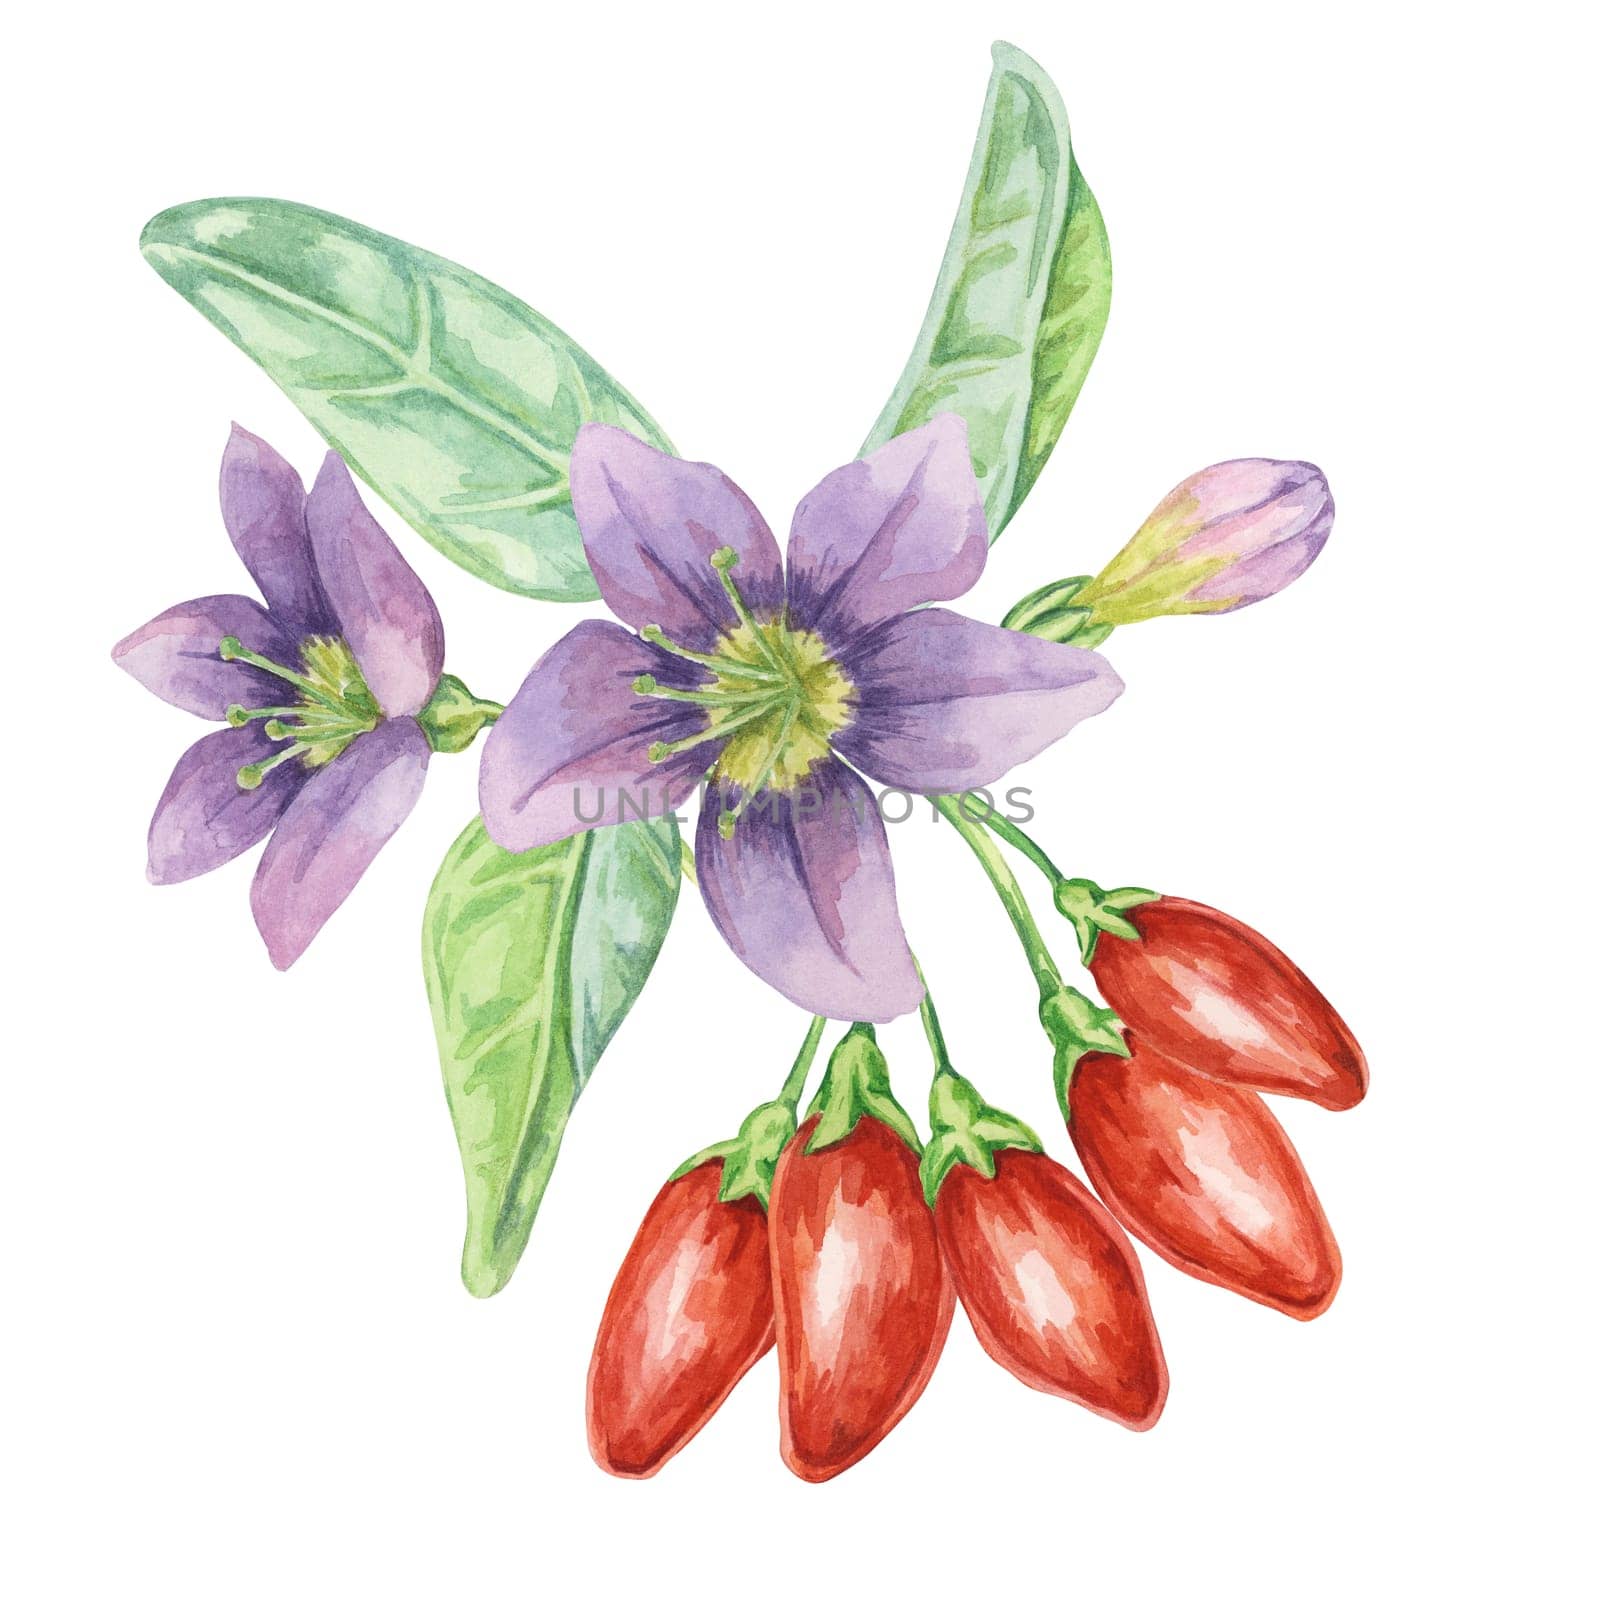 Goji berries with flowers in watercolor by Fofito